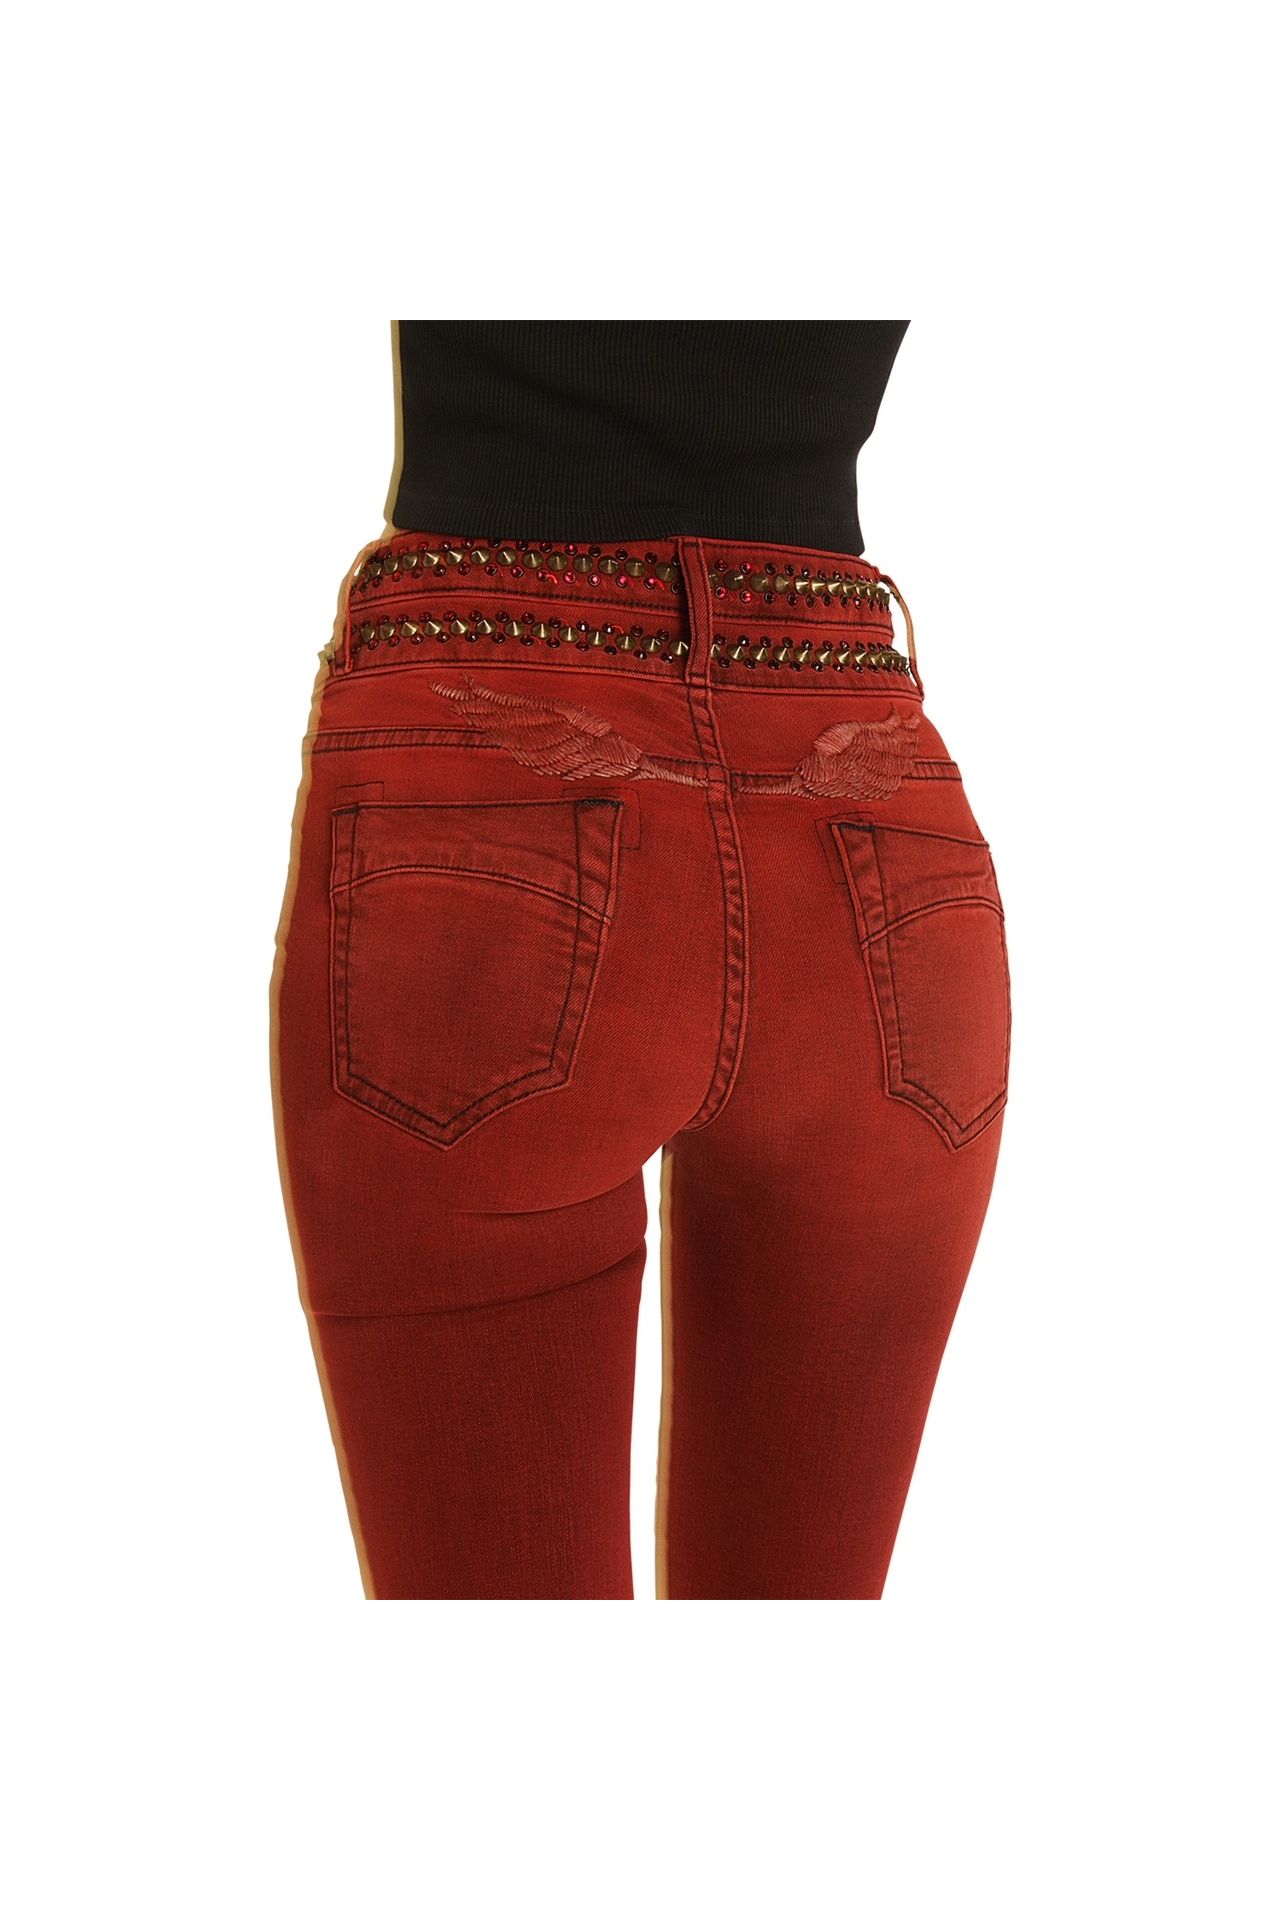 ROBIN'S DOUBLE WAIST SKINNY WITH CRYSTALS AND SPIKES IN F-UP RED